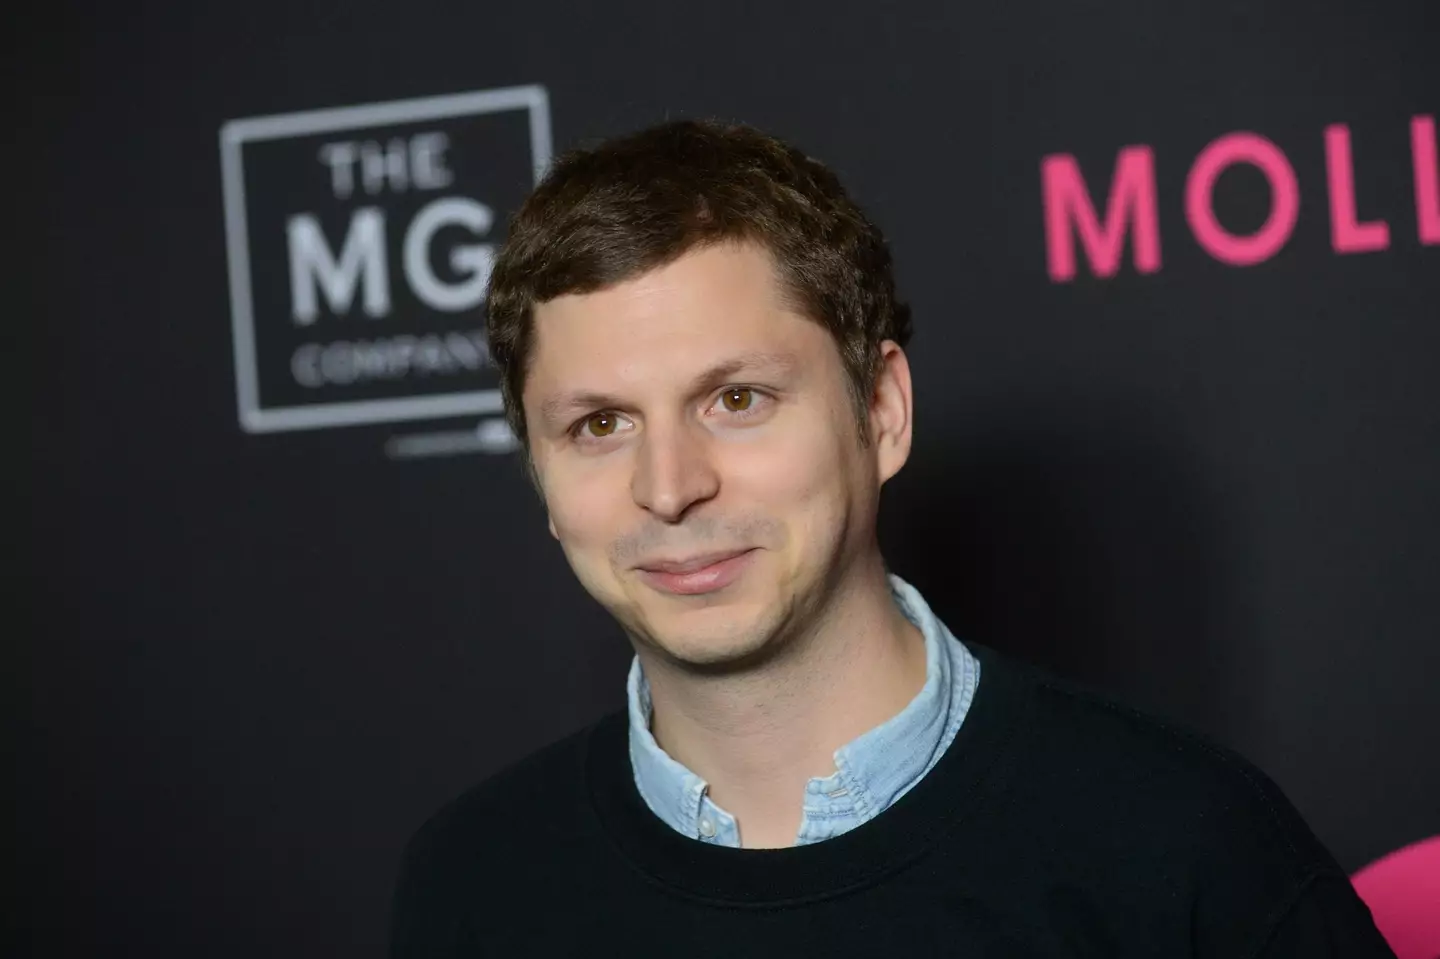 Cera discussed whether ditching smartphones has impacted his career.